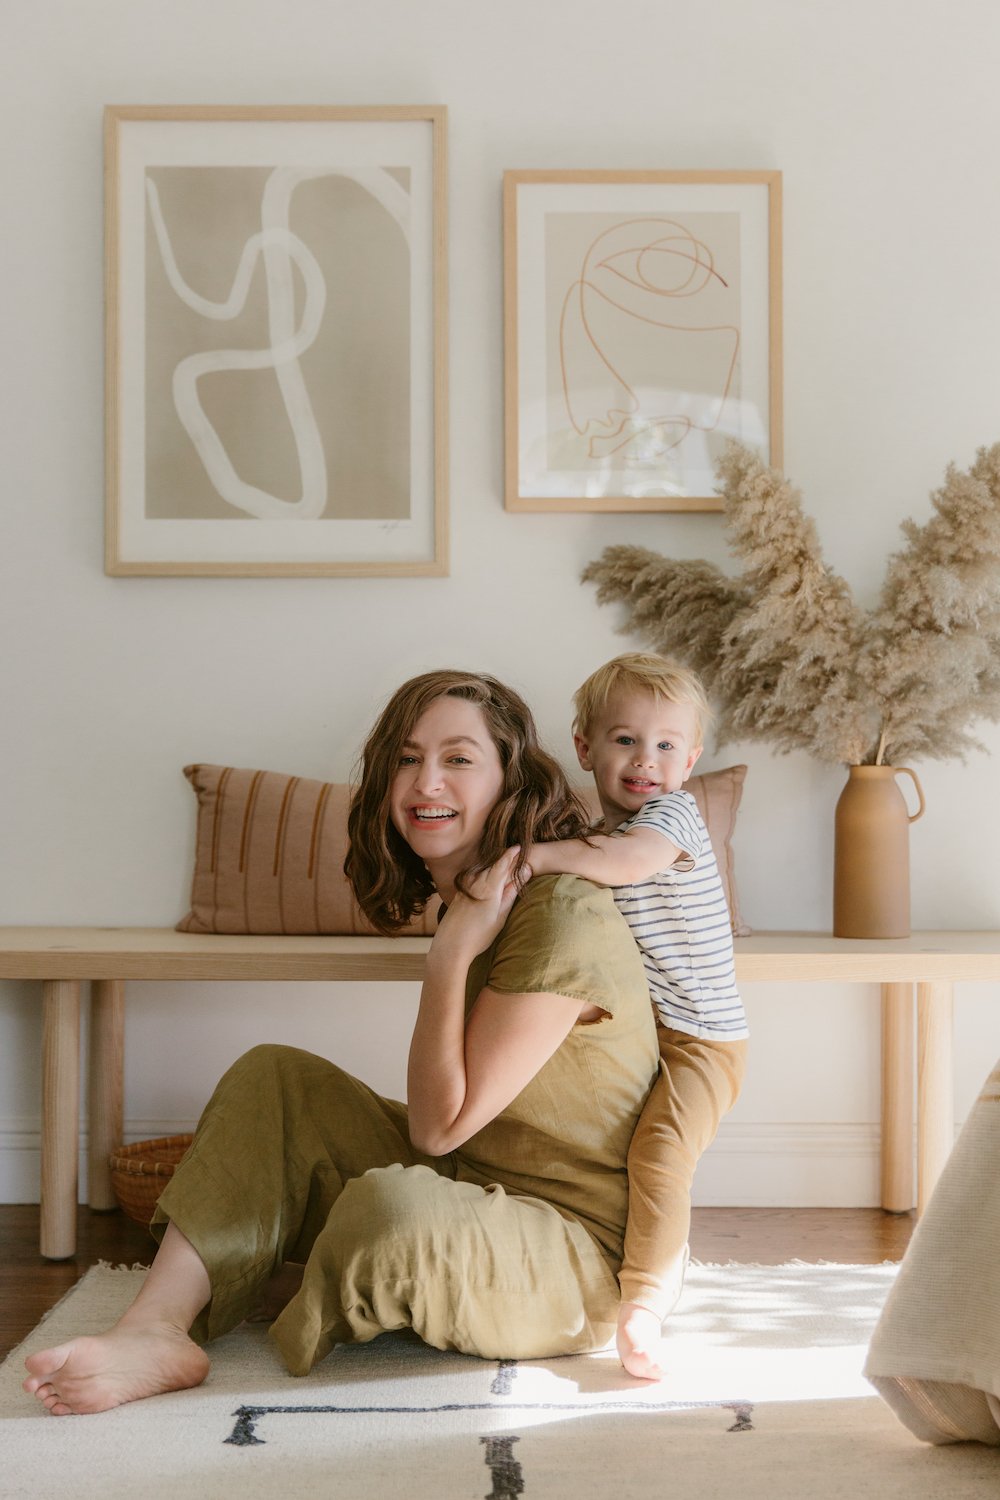 molly madfis home, almost makes perfect, california home, neutral home decor, mother and son, mother, family